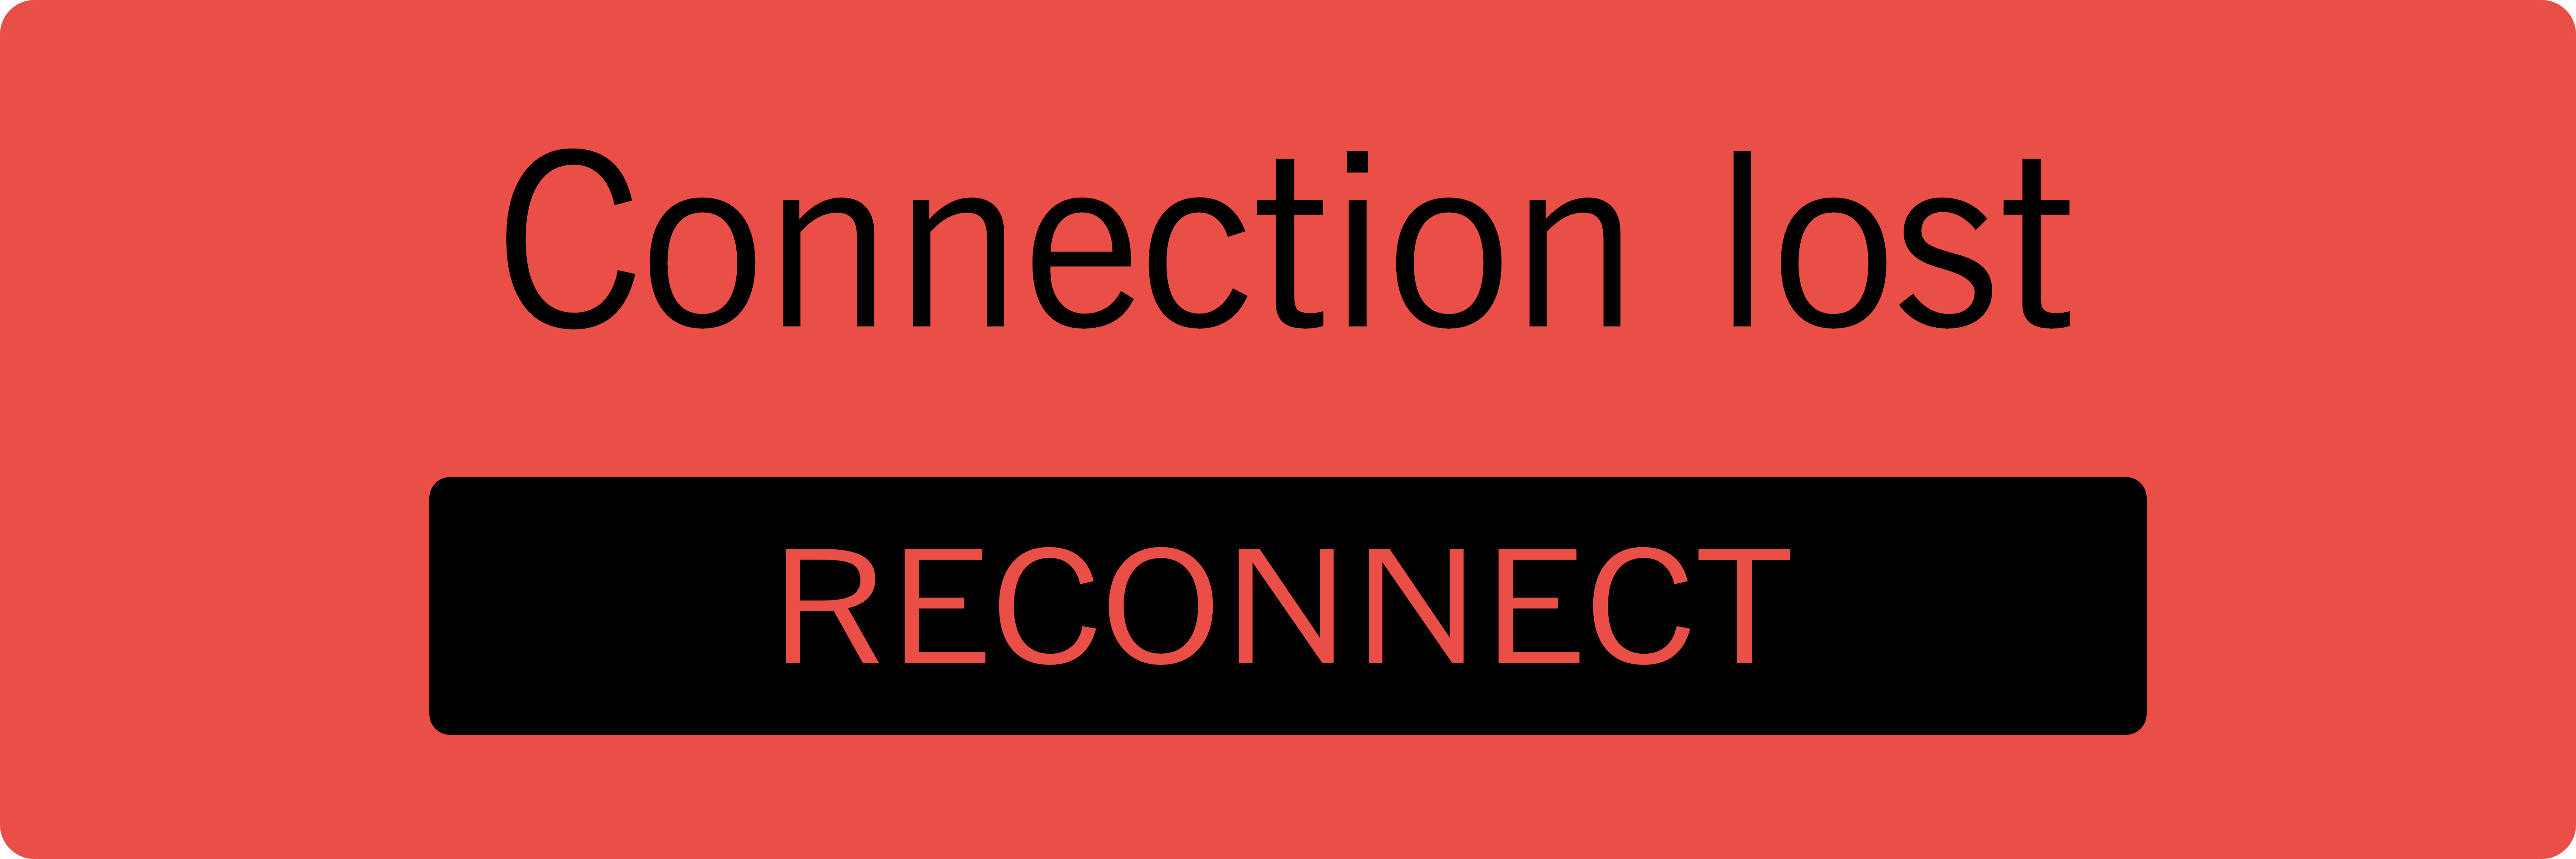 connection_lost.png